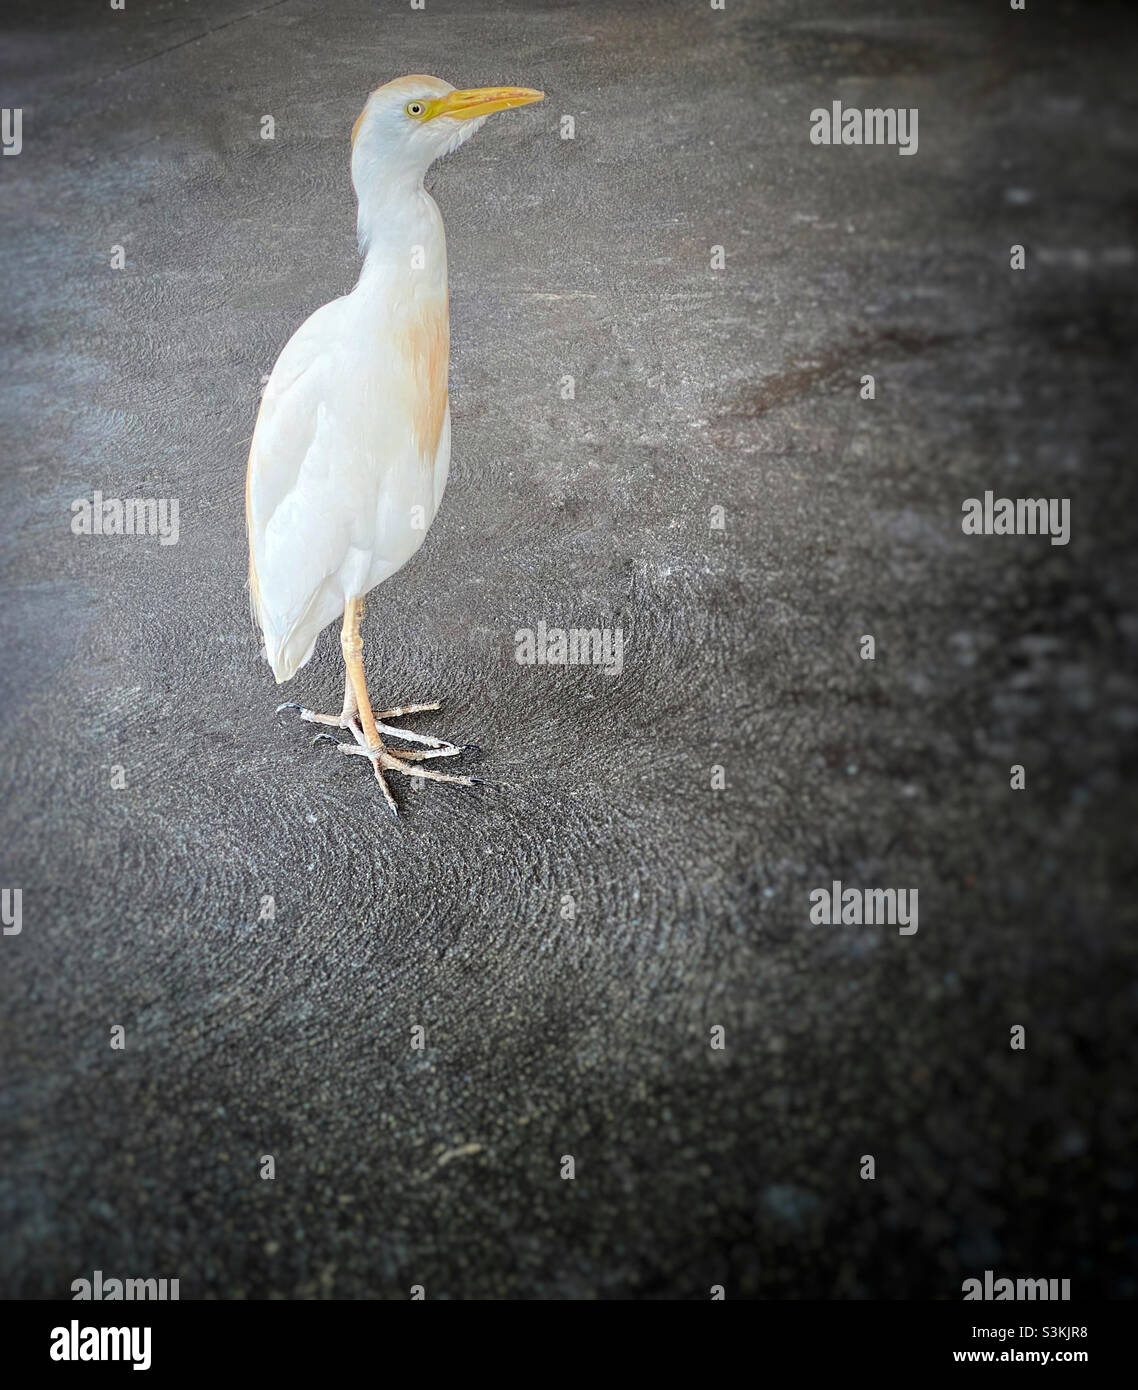 Closeup of a white egret standing on a cement floor Stock Photo